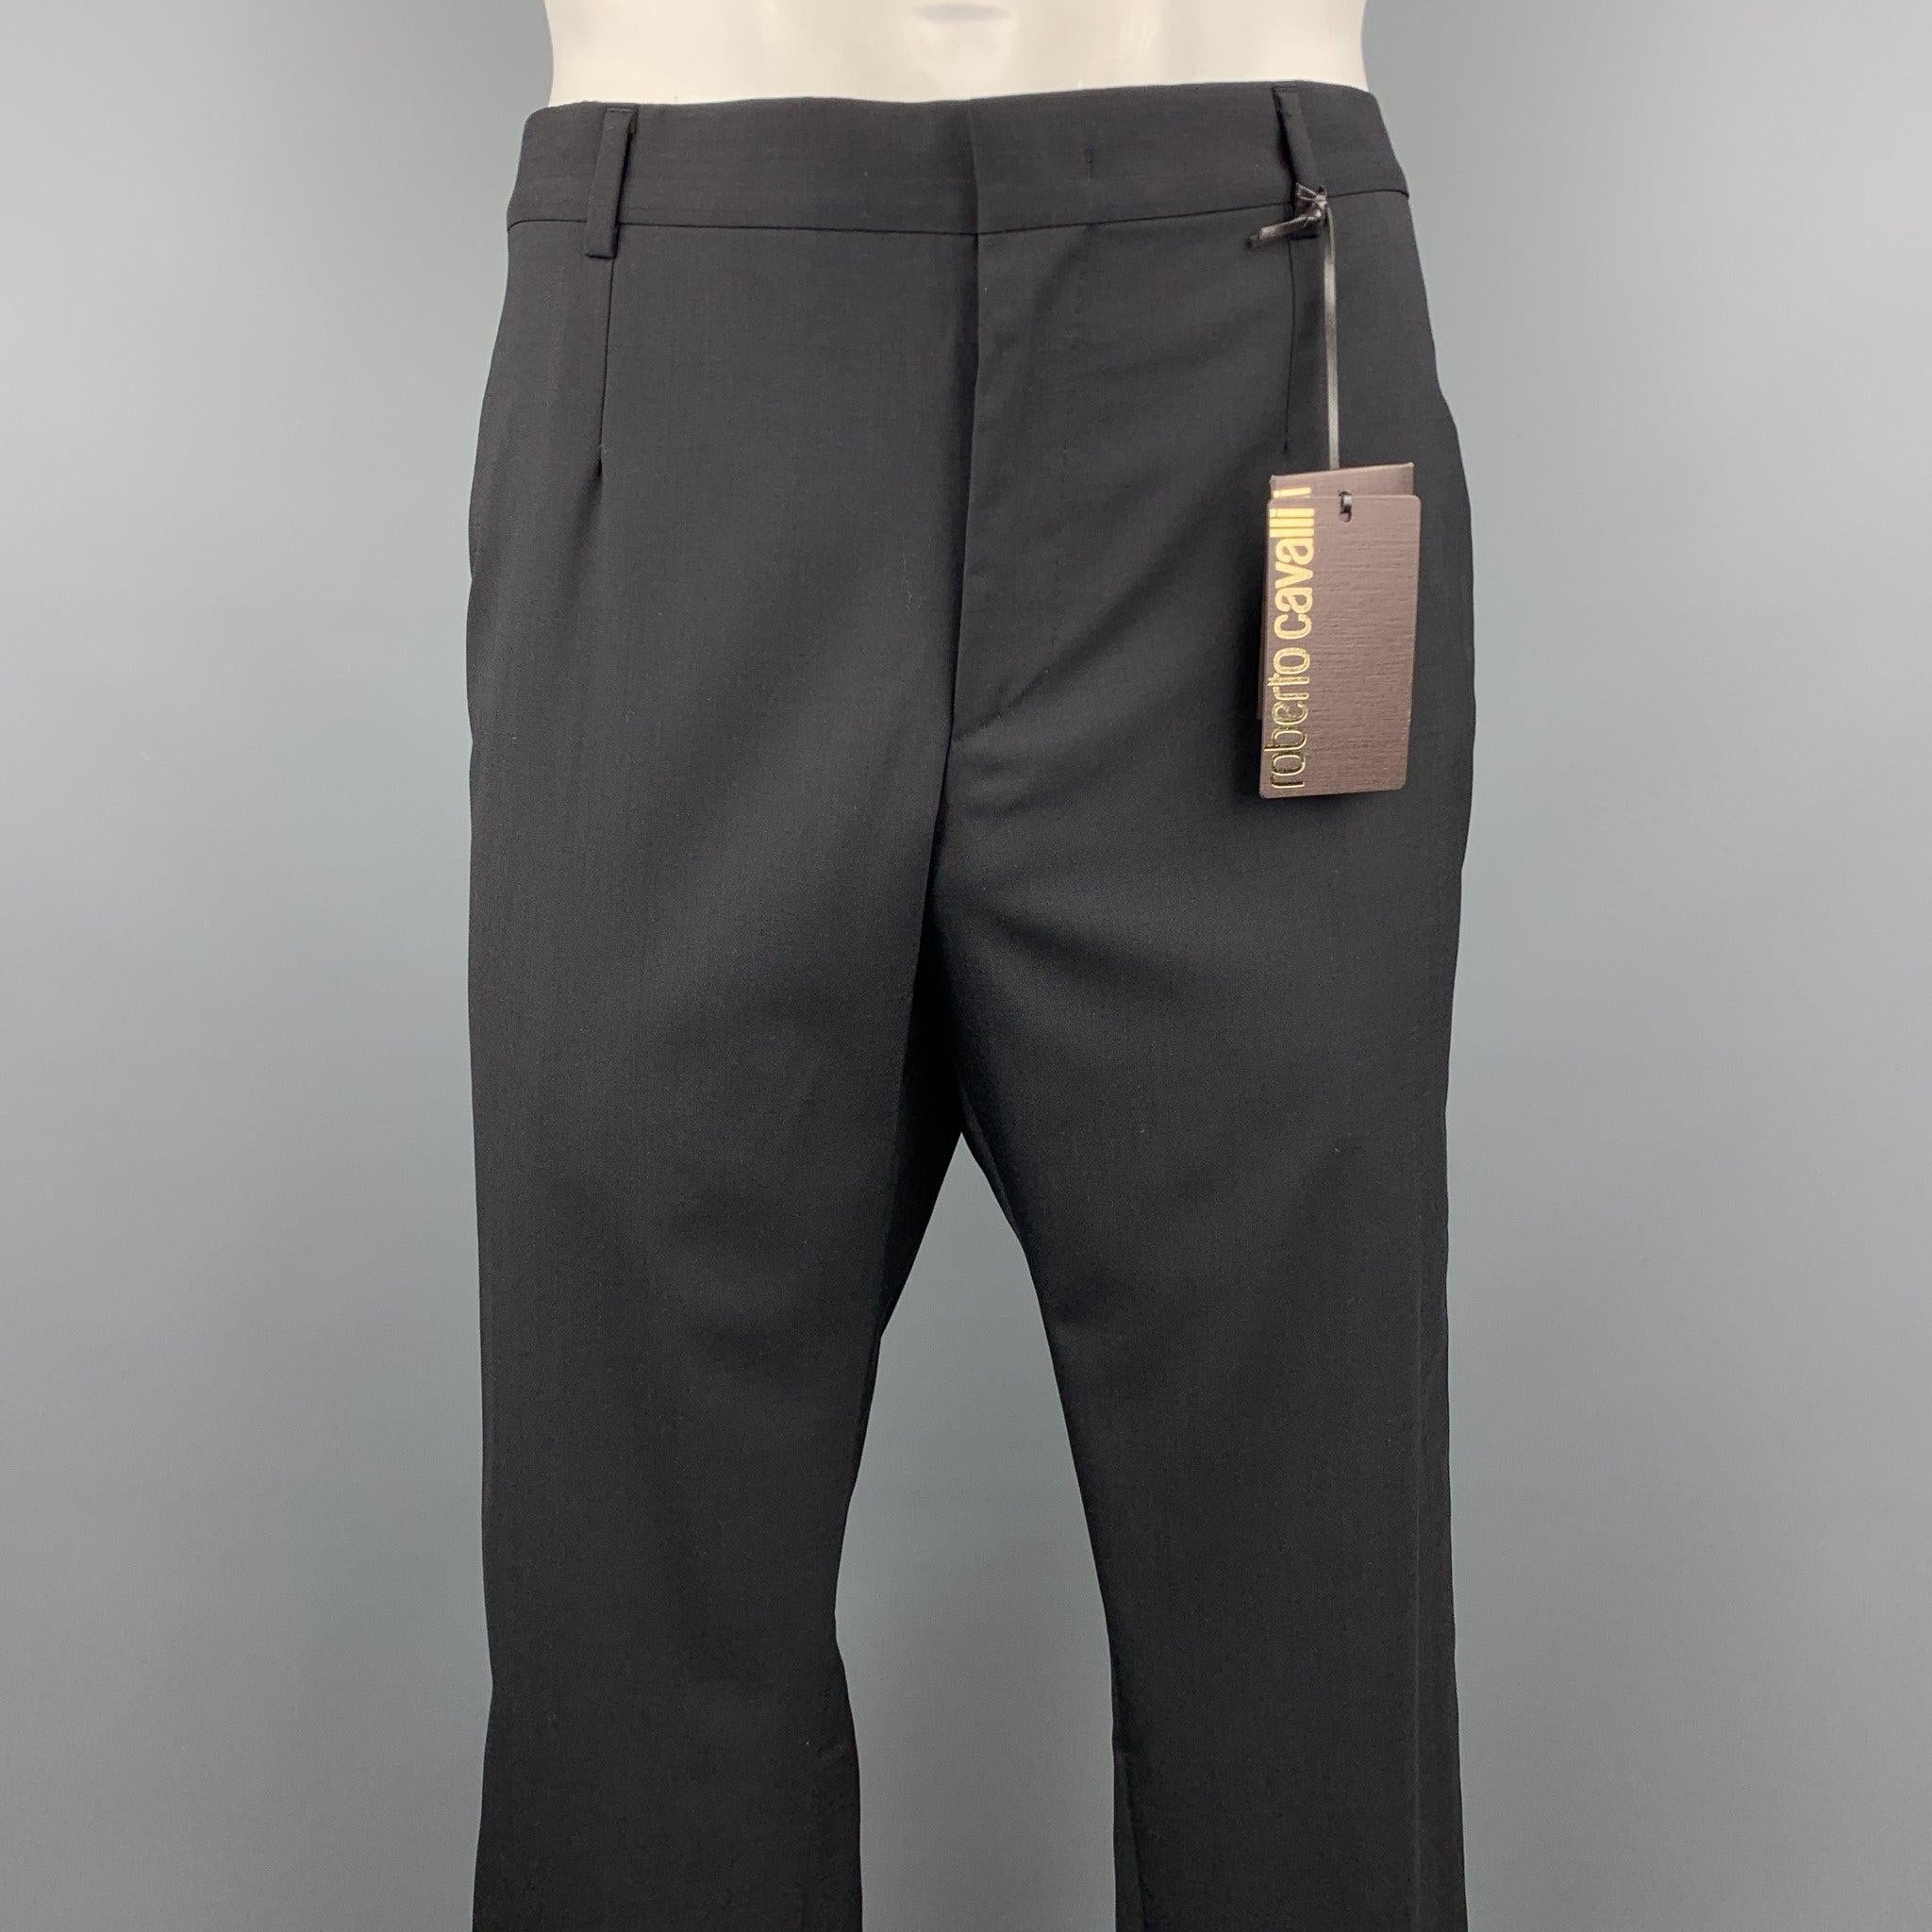 ROBERTO CAVALLI tuxedo dress pants comes in a black wool / elastane featuring a front pleat, metallic trim, and a zip fly closure. Made in Italy.New With Tags.
 

Marked:   IT 54 

Measurements: 
  Waist: 40 inches Rise: 9.5 inches 
Inseam: 37